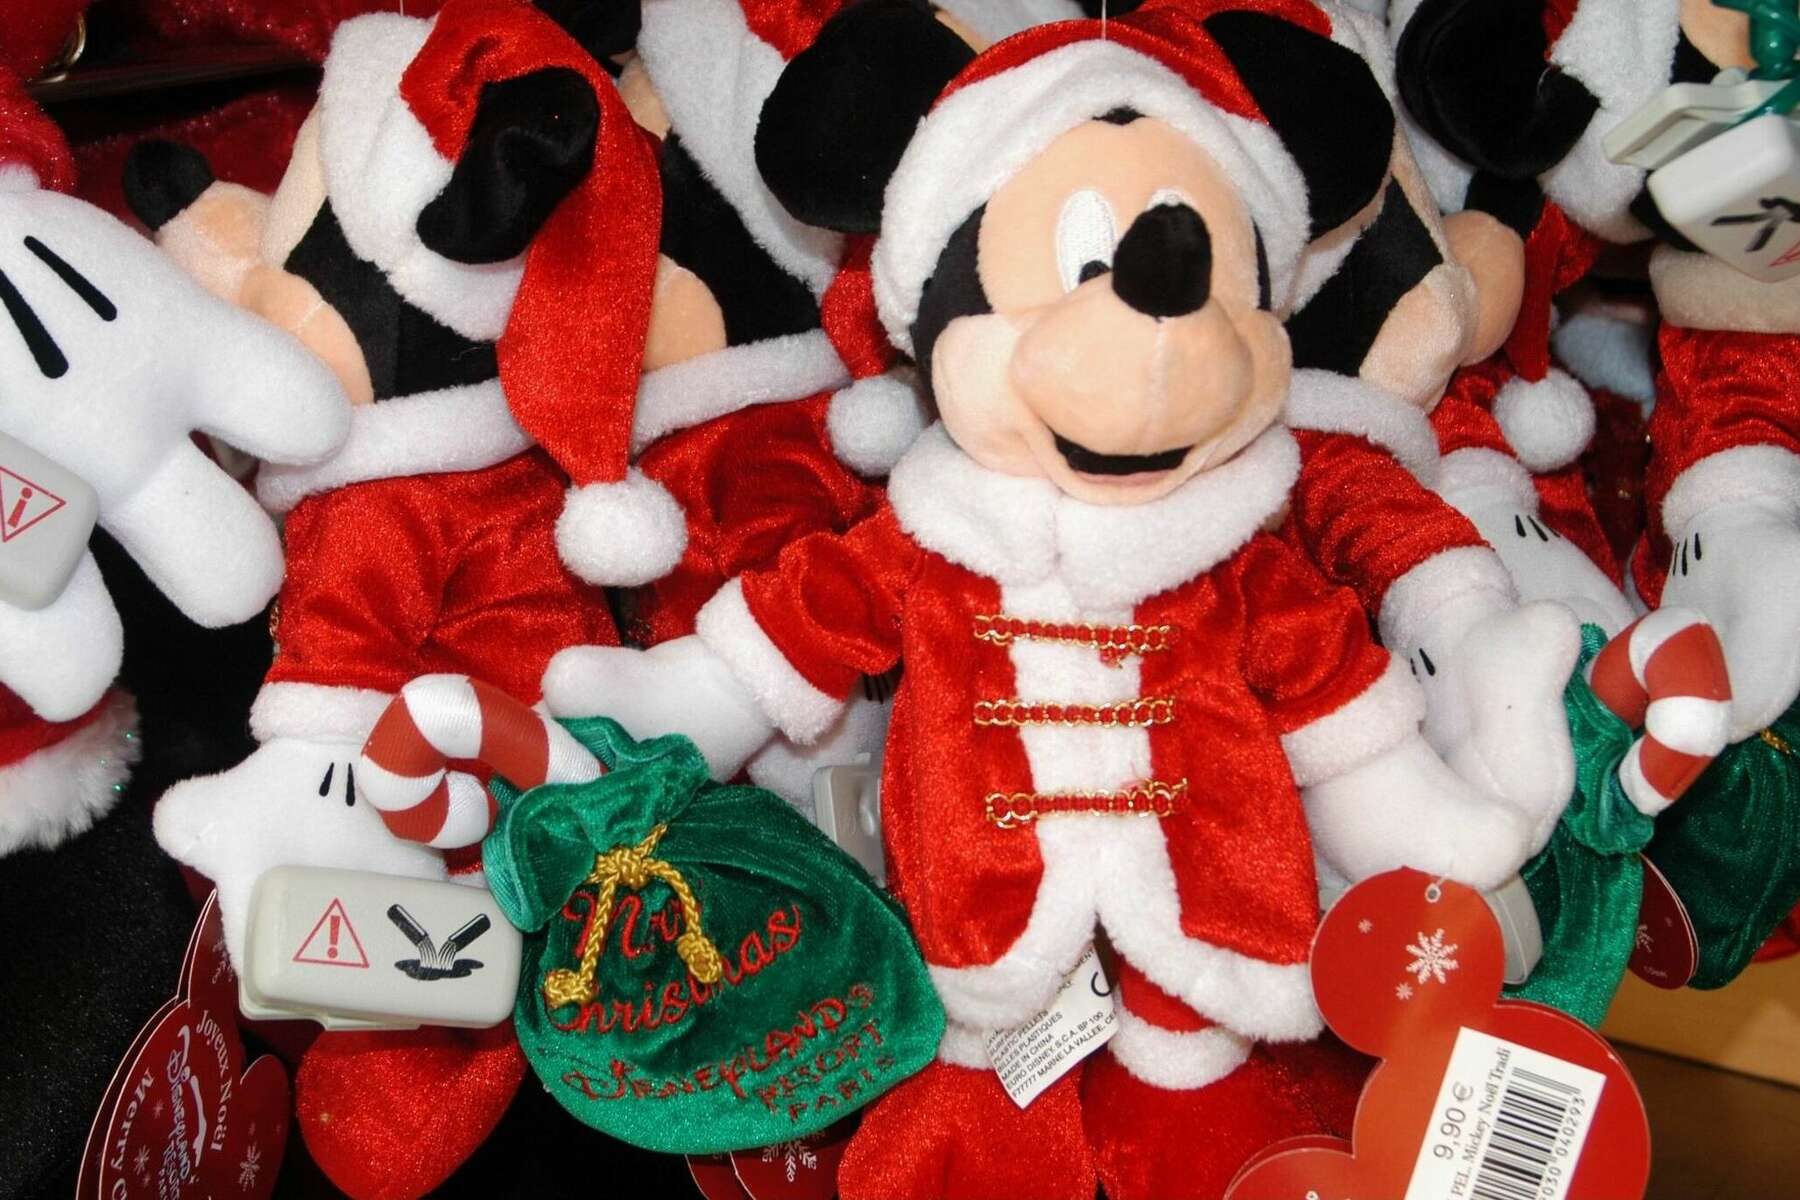 Mickey Saves Christmas Continues a Beloved Holiday Special